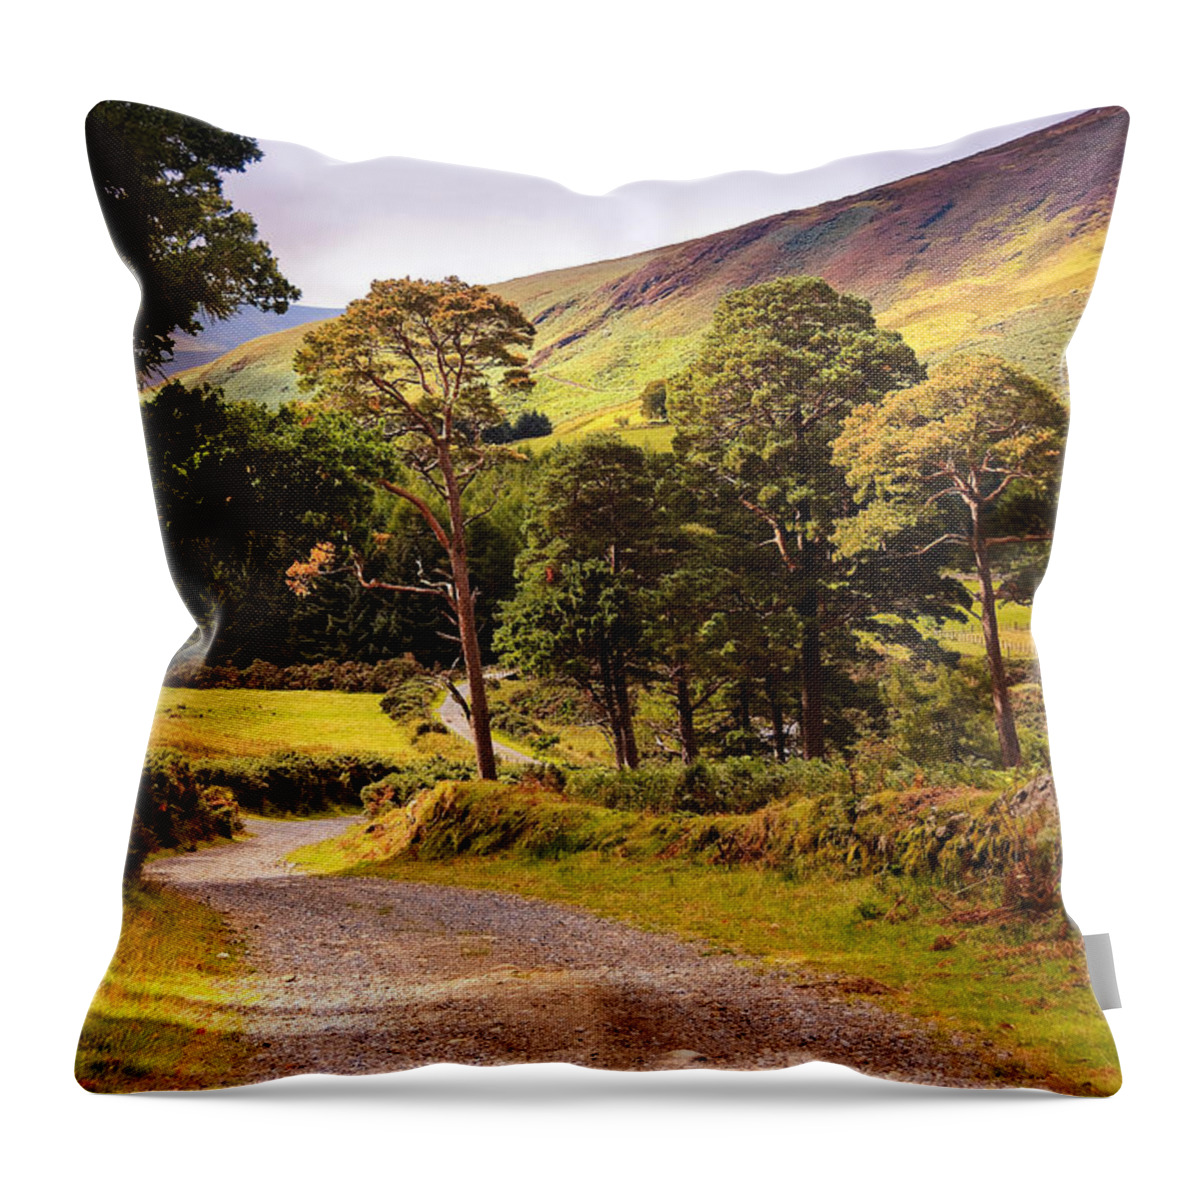 Ireland Throw Pillow featuring the photograph Celtic Spirit. Wicklow Mountains. Ireland by Jenny Rainbow